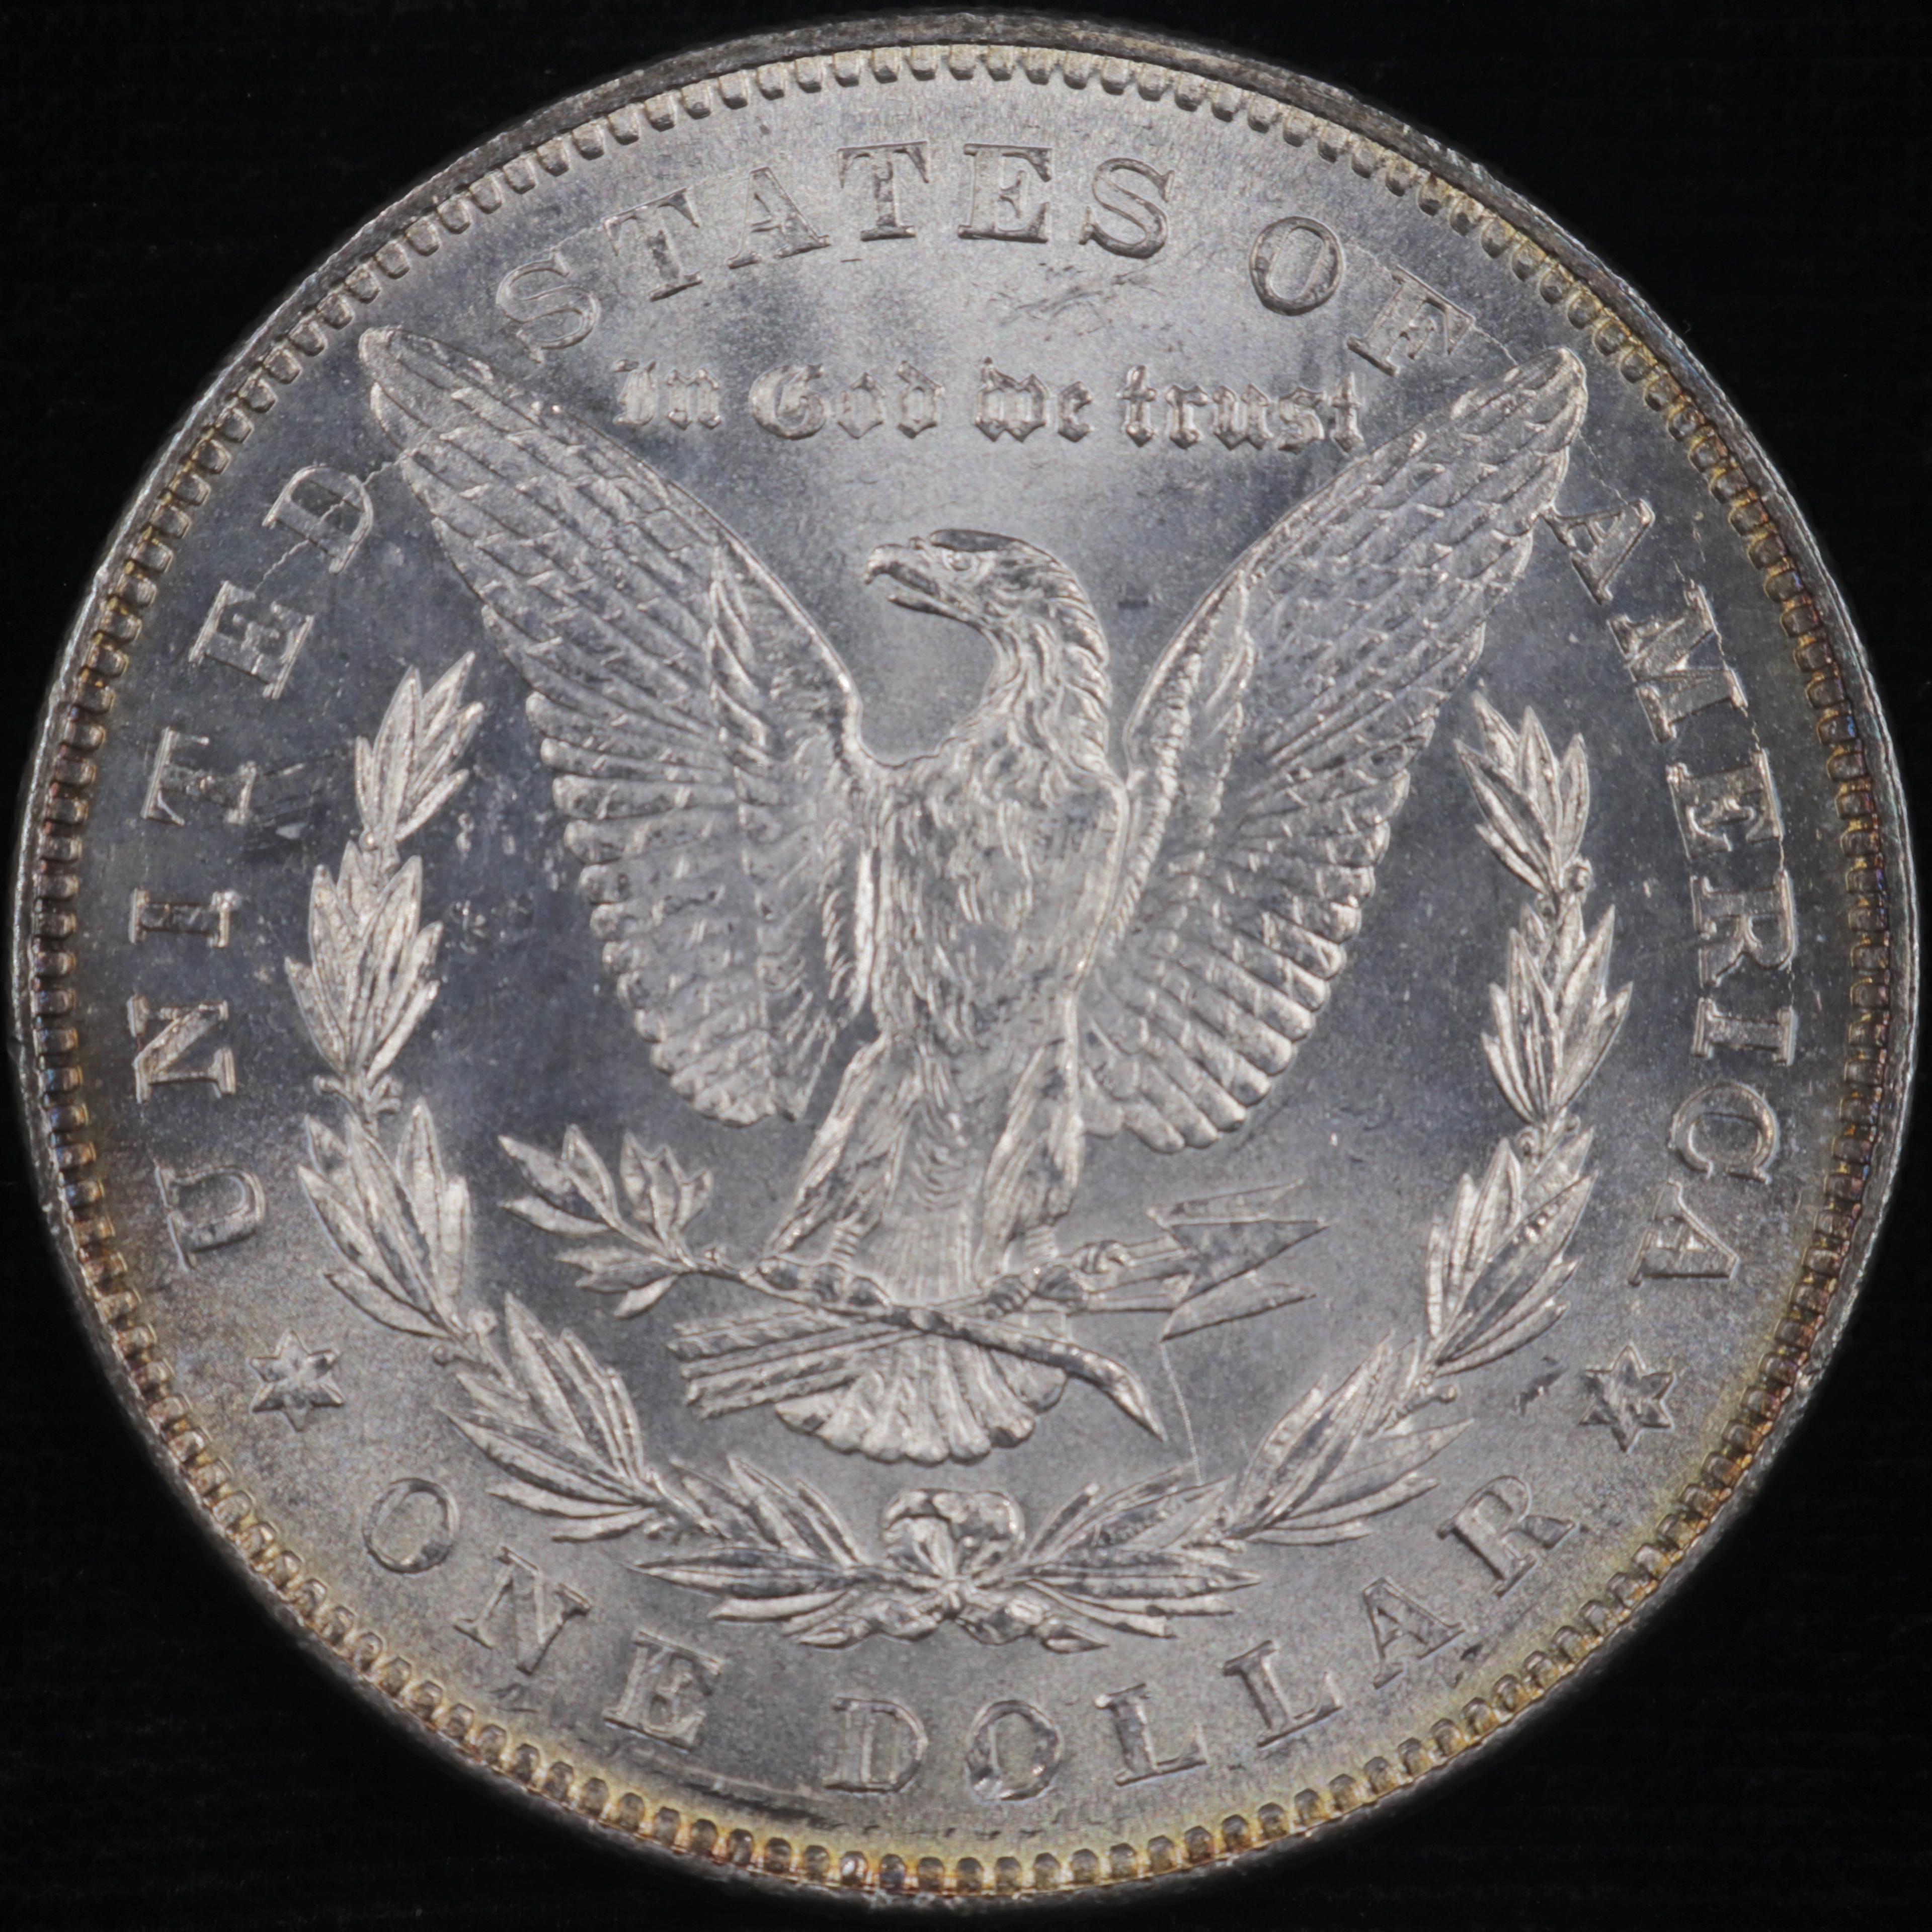 1878 7 tail feathers, 2nd reverse U.S. Morgan silver dollar